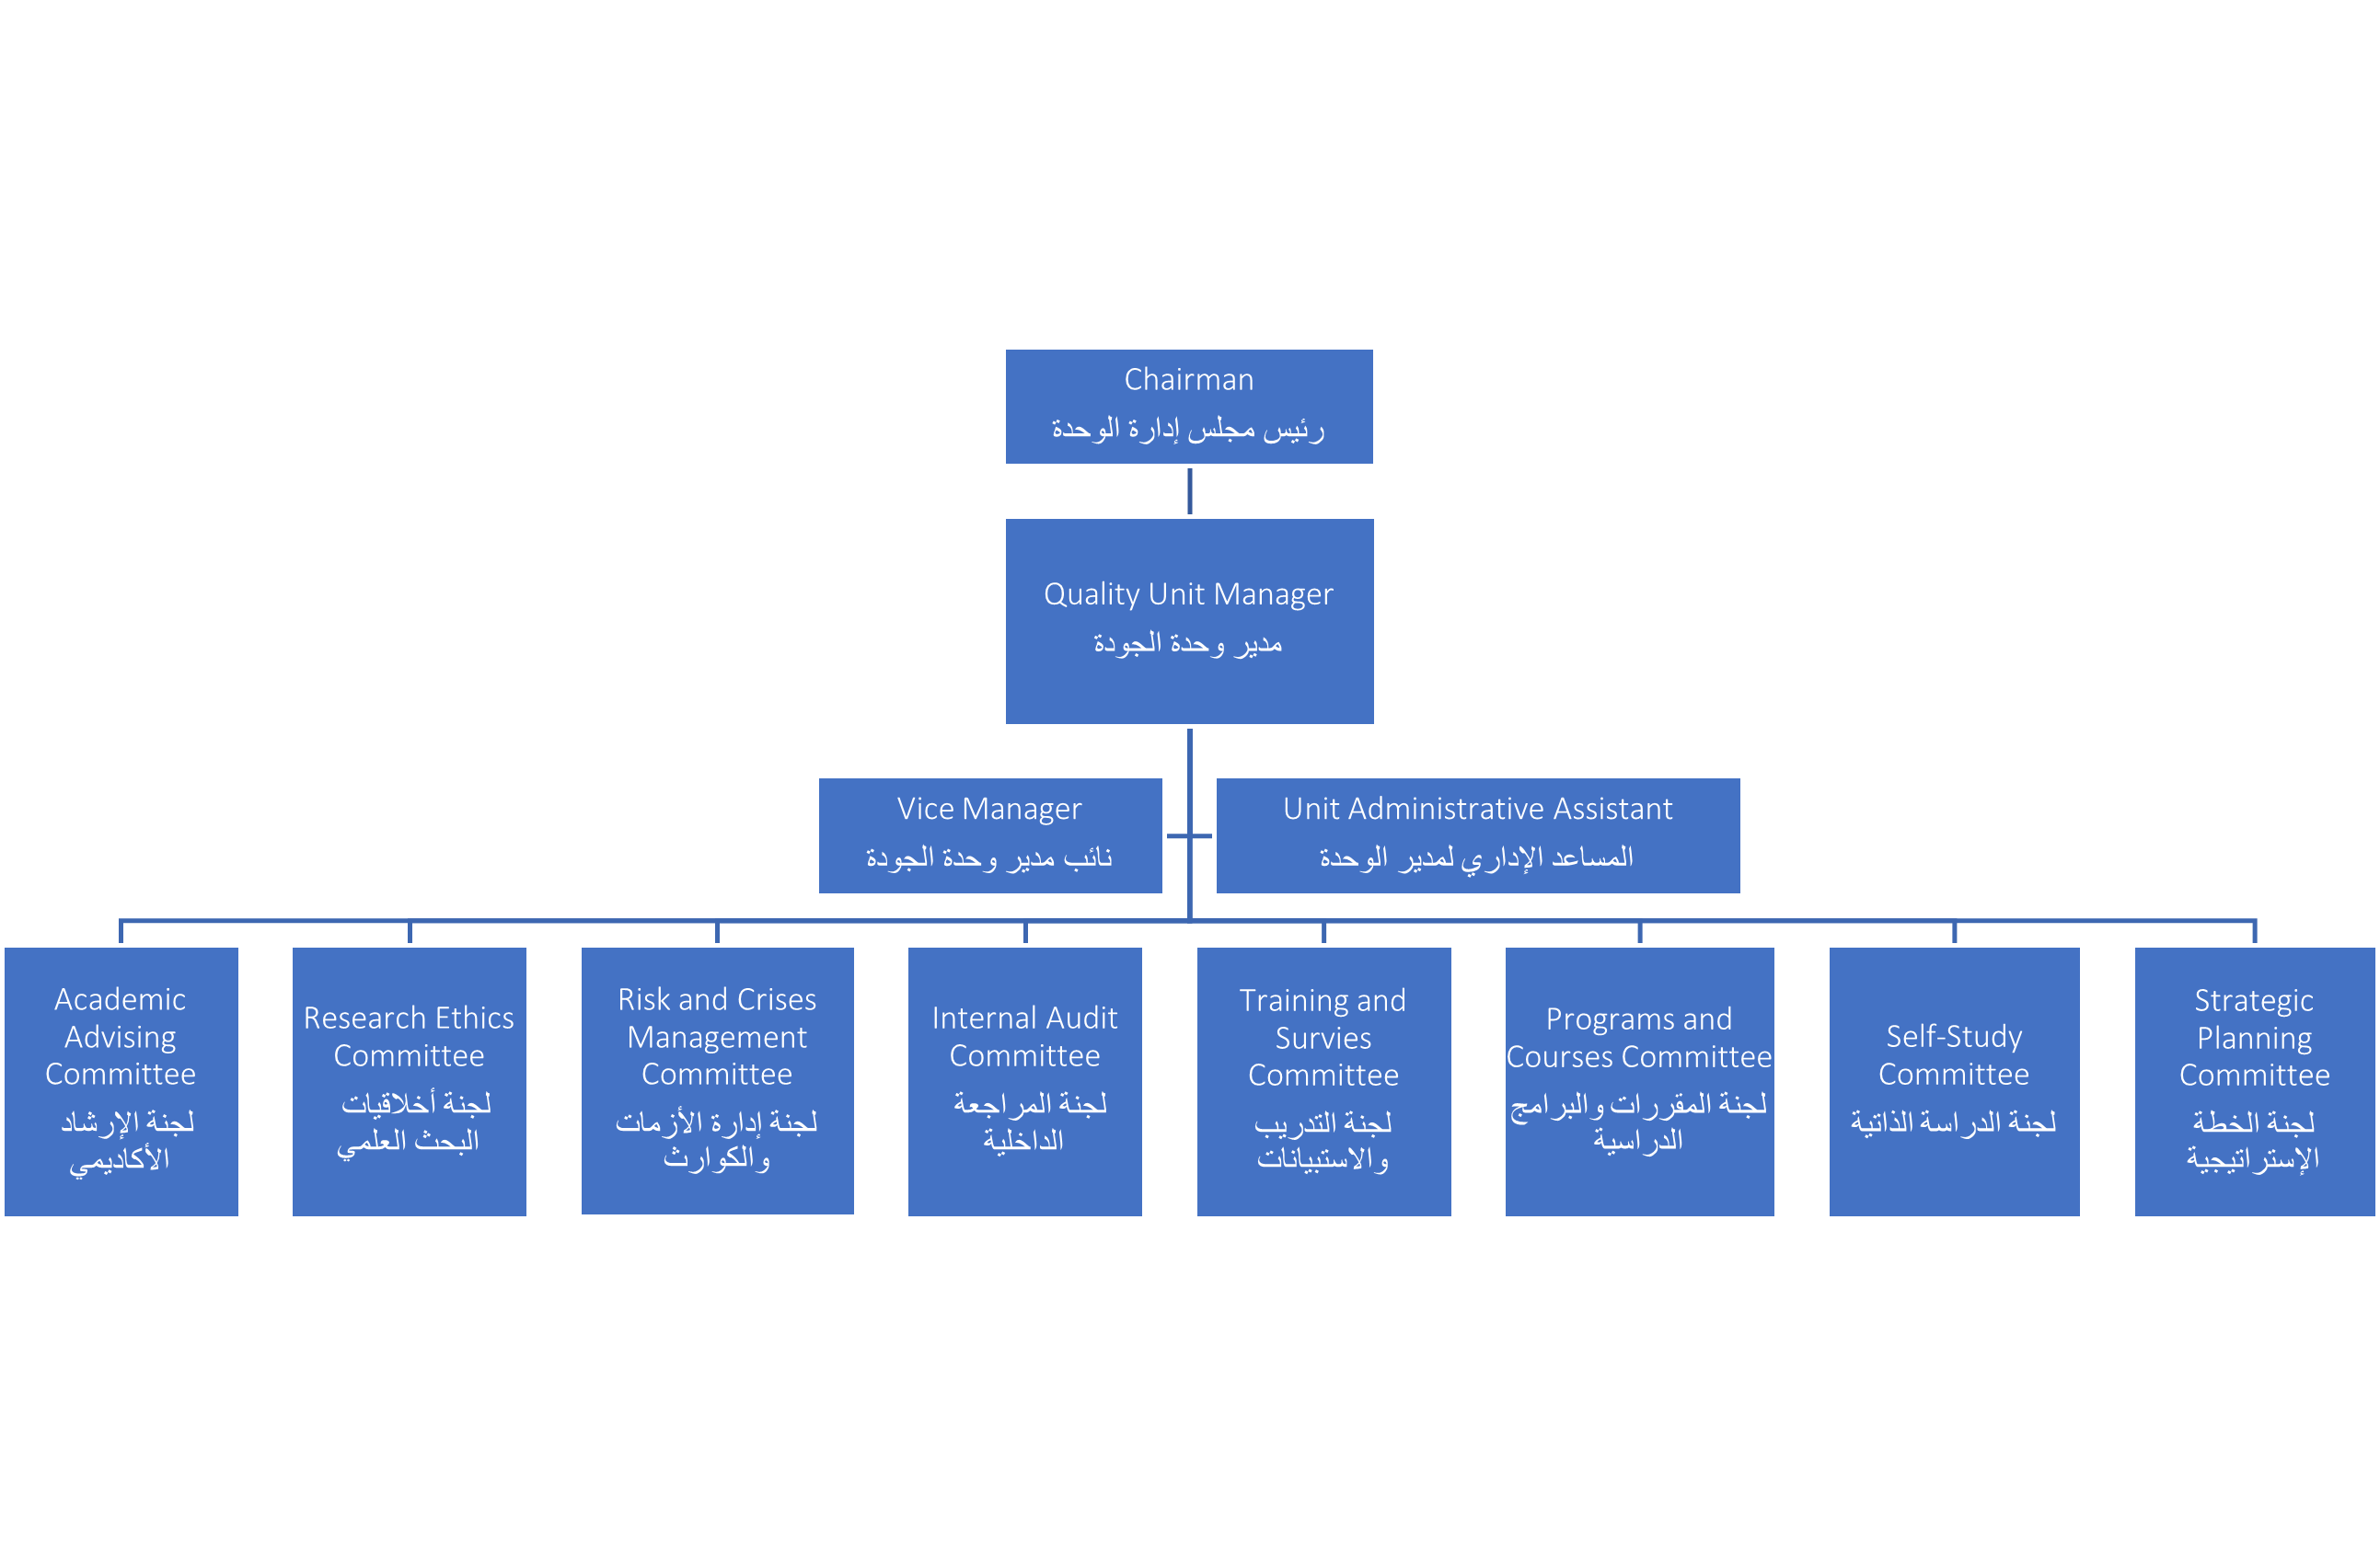 Organizational structure of the unit